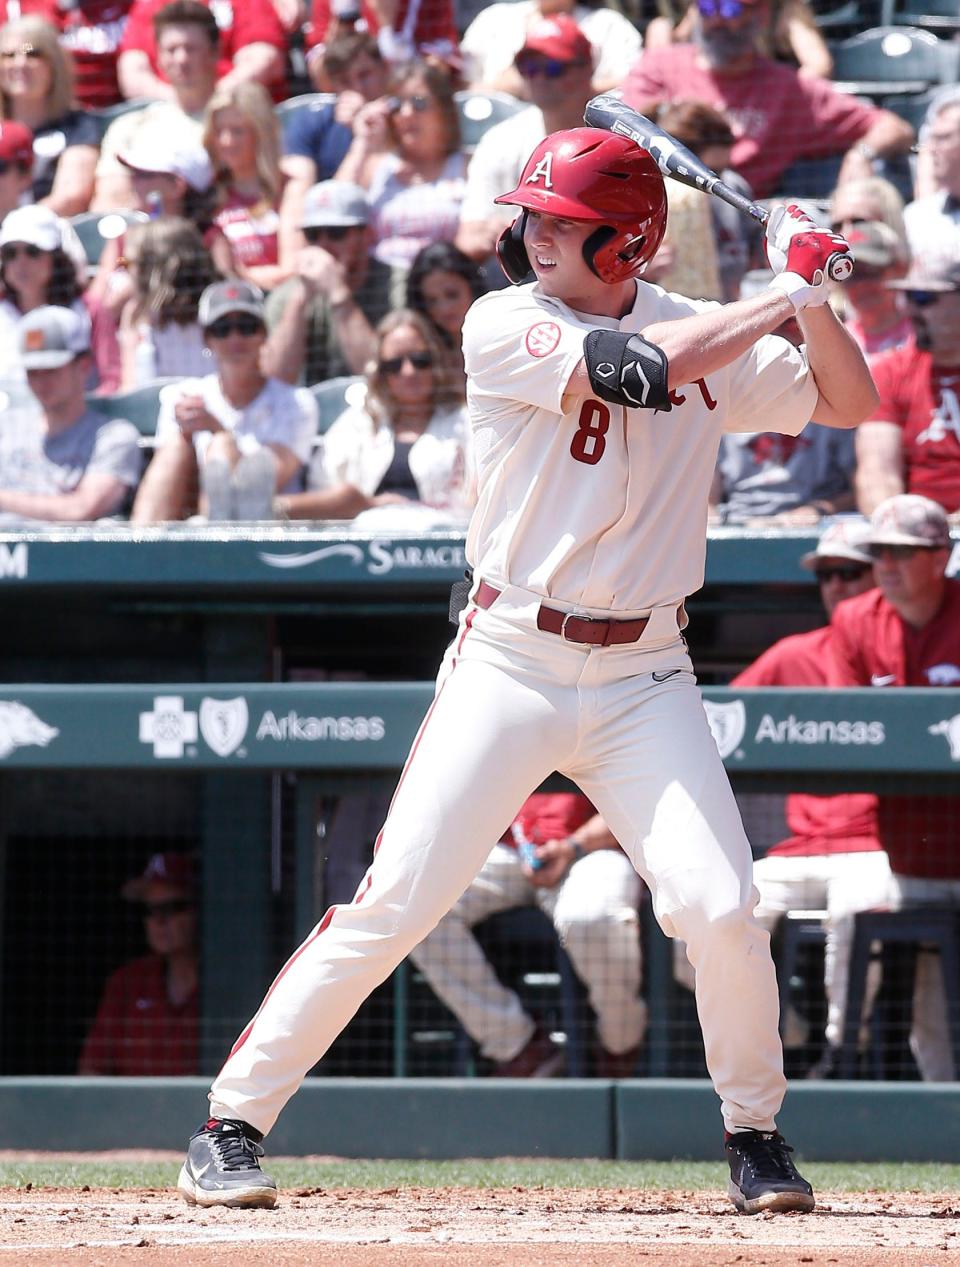 University of Arkansas-Fayetteville leftfielder Jace Bohrofen (8) waits for the pitch during the Razorbacks' SEC conference game against Ole Miss on May 1, 2022, at Baum-Walker Stadium in Fayetteville, Ark.